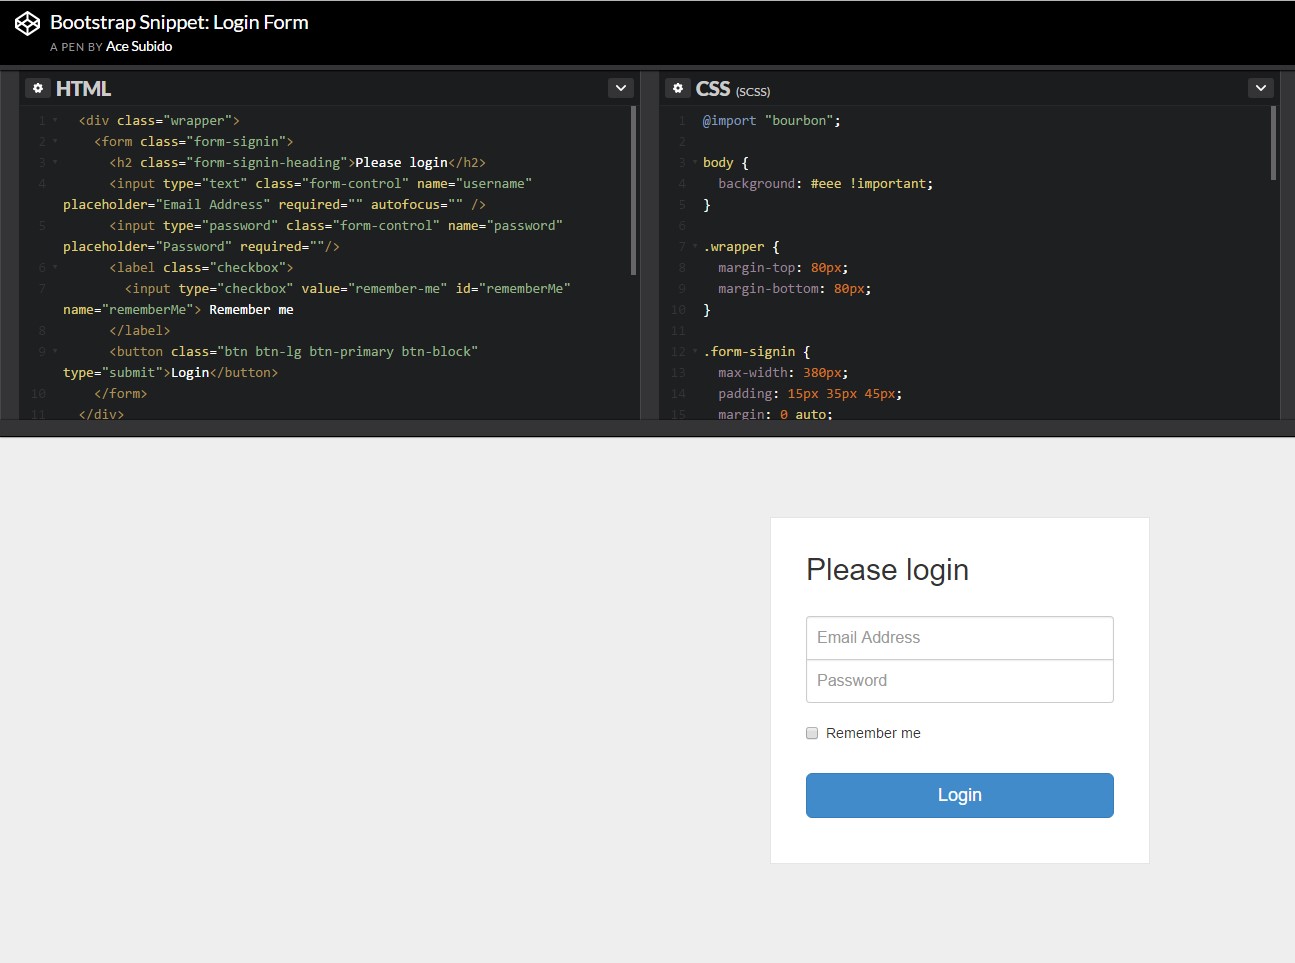  One more  representation of Bootstrap Login Form